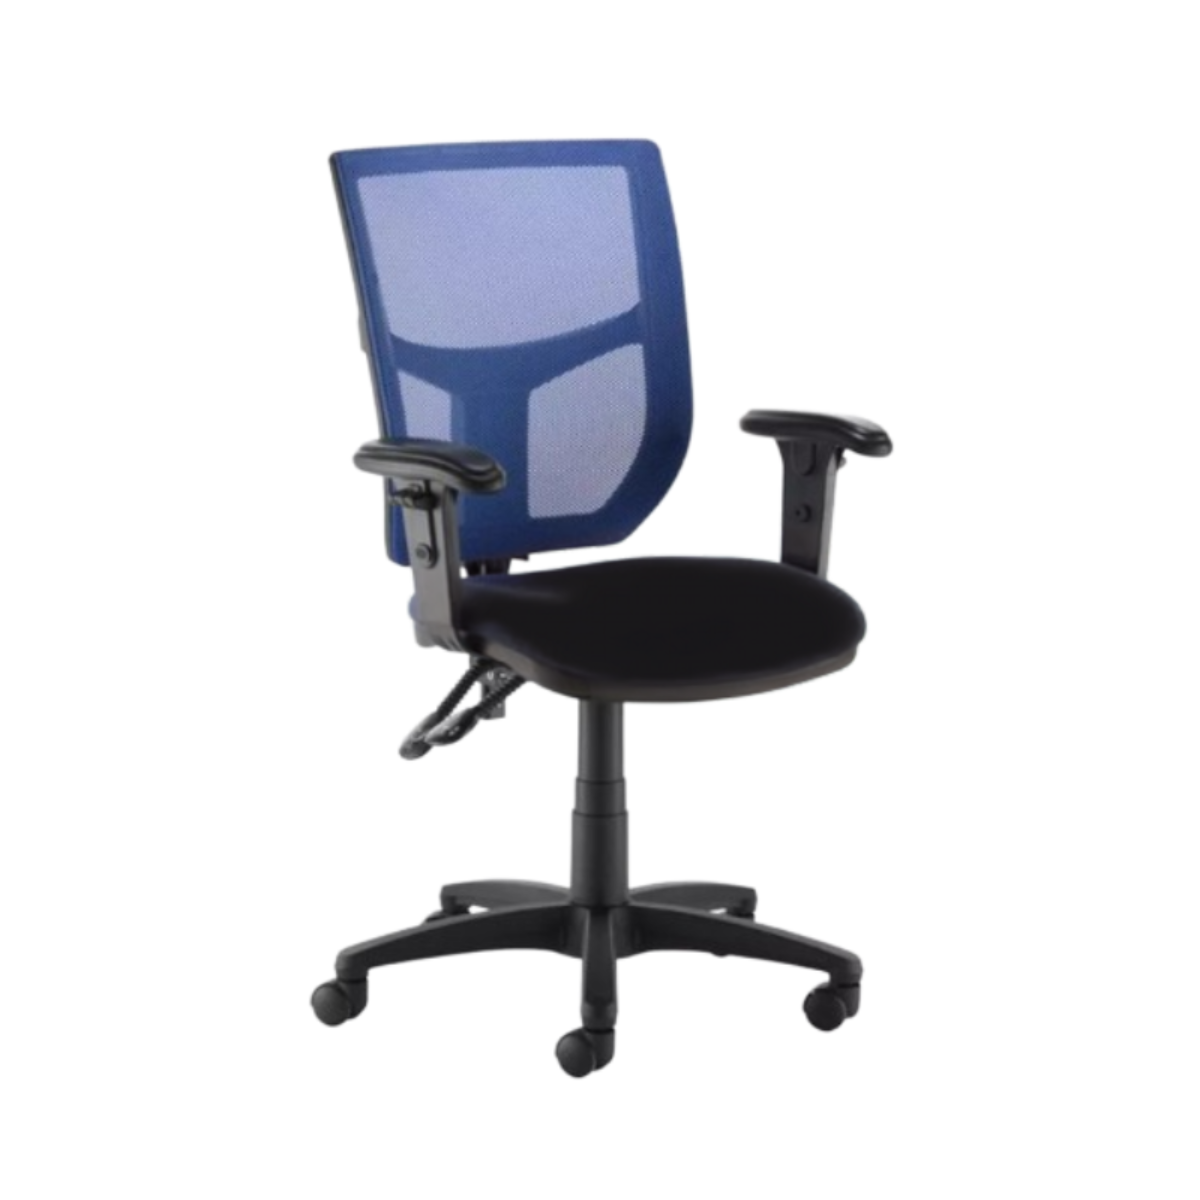 Altino mesh back with Height adjustable arms